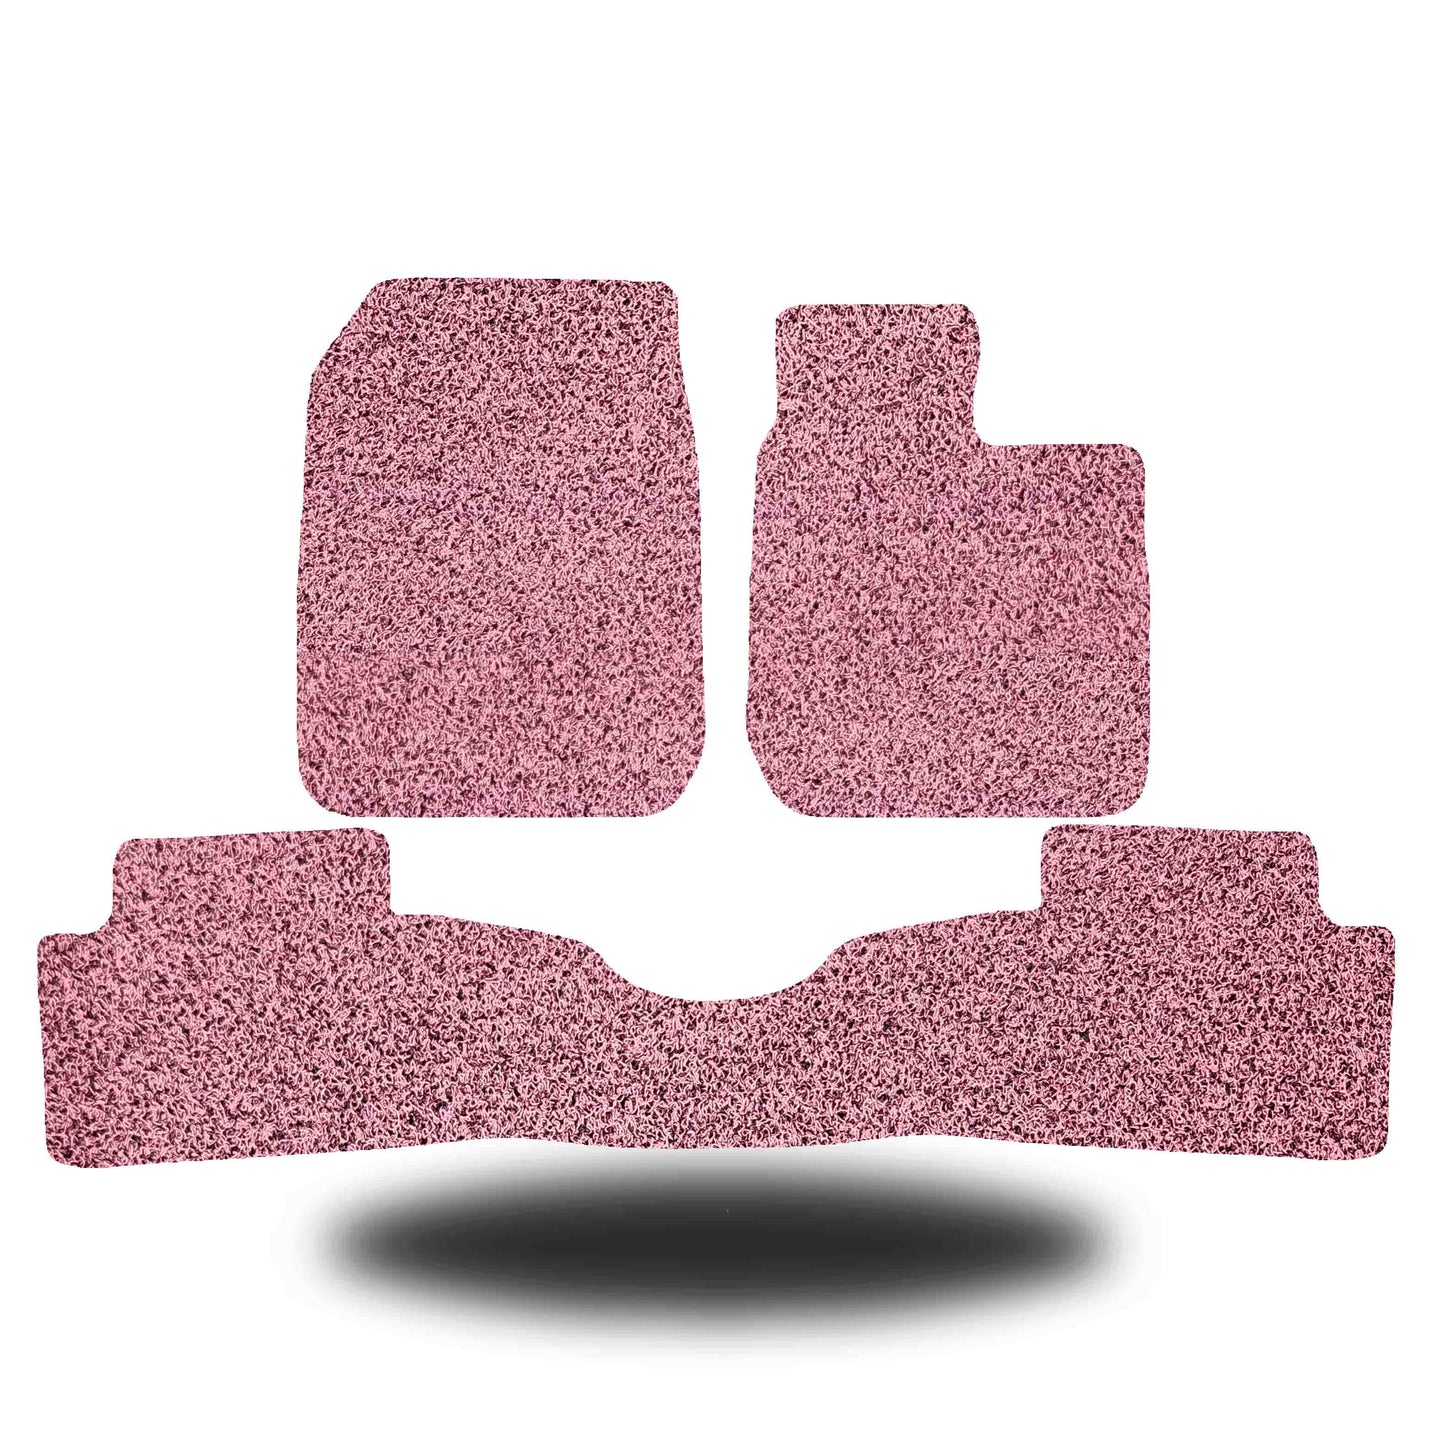 for All-new BYD Atto 3 2022-Current , Premium Car Floor Mats, New Arrival!